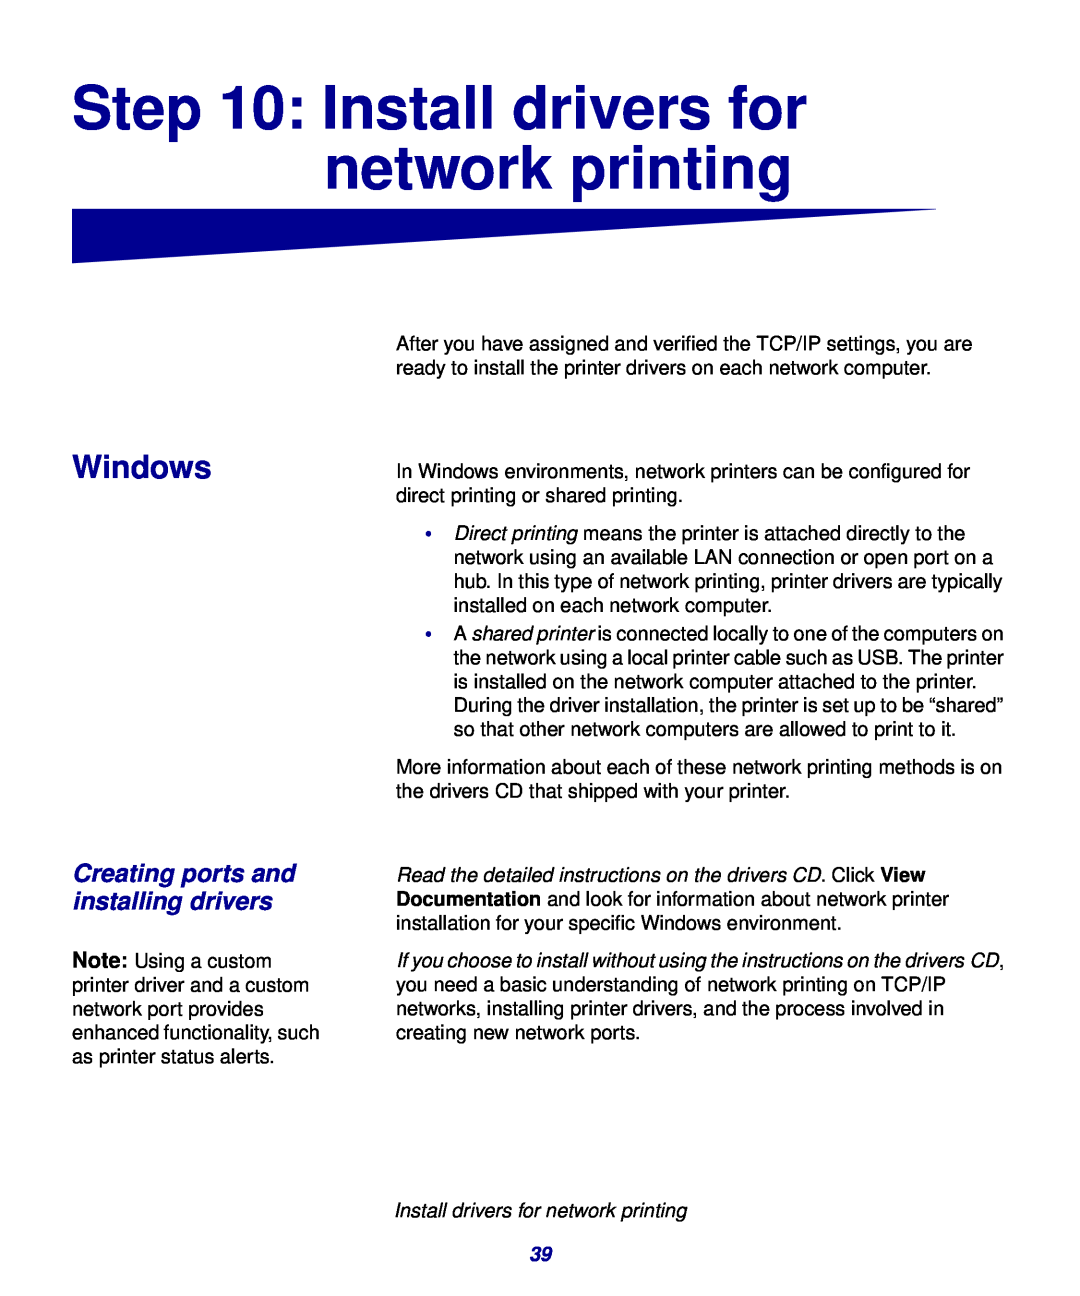 Lexmark 323, 321 setup guide Install drivers for network printing, Windows, Creating ports and installing drivers 